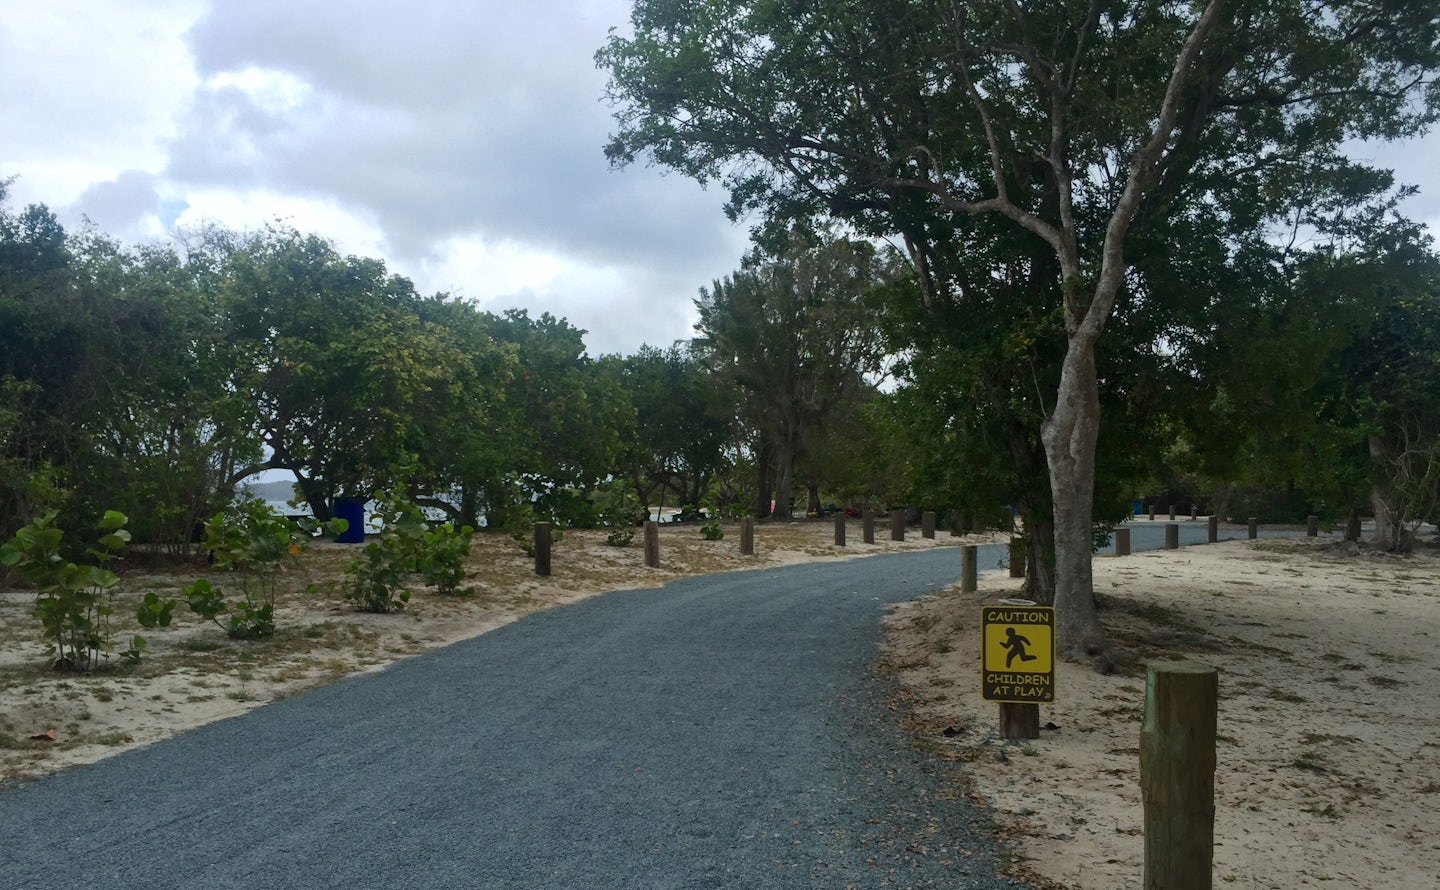 Smith Bay Beach was completely redone after hurriane adn has ample parking, pic